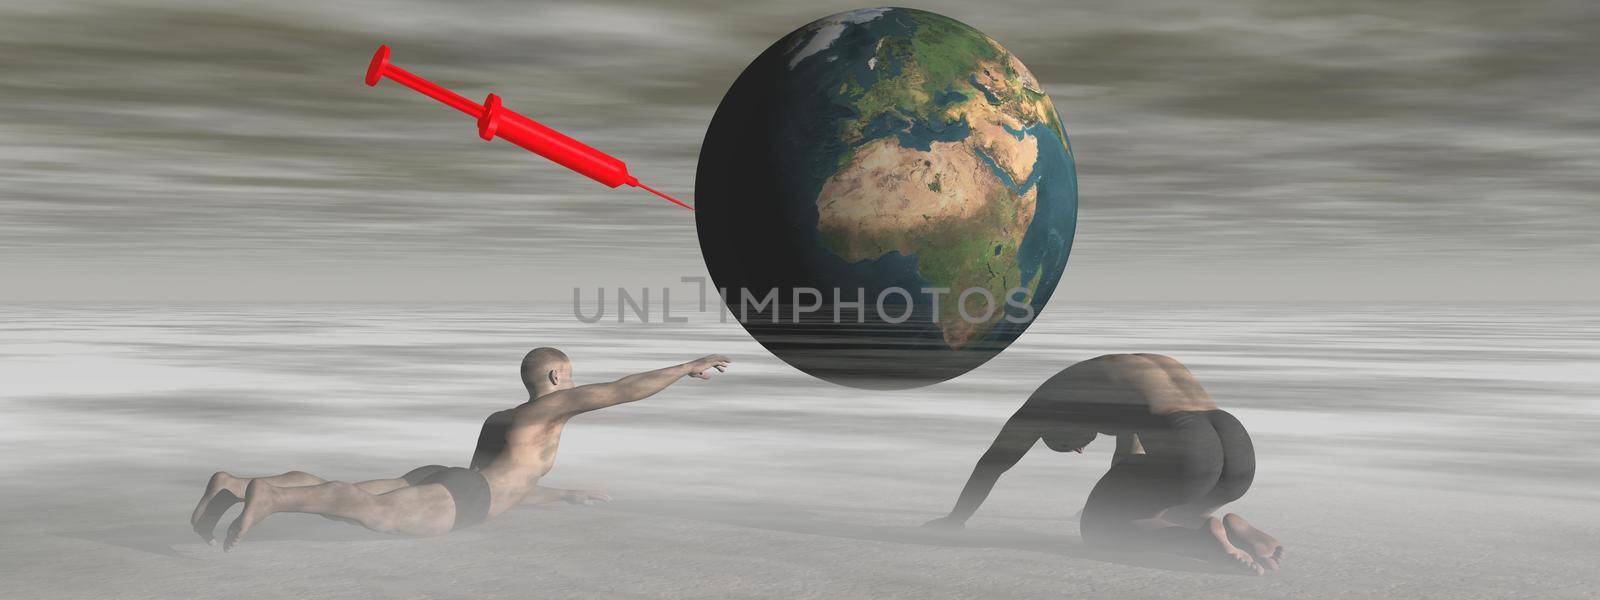 The human kills the planet - 3d rendering by mariephotos